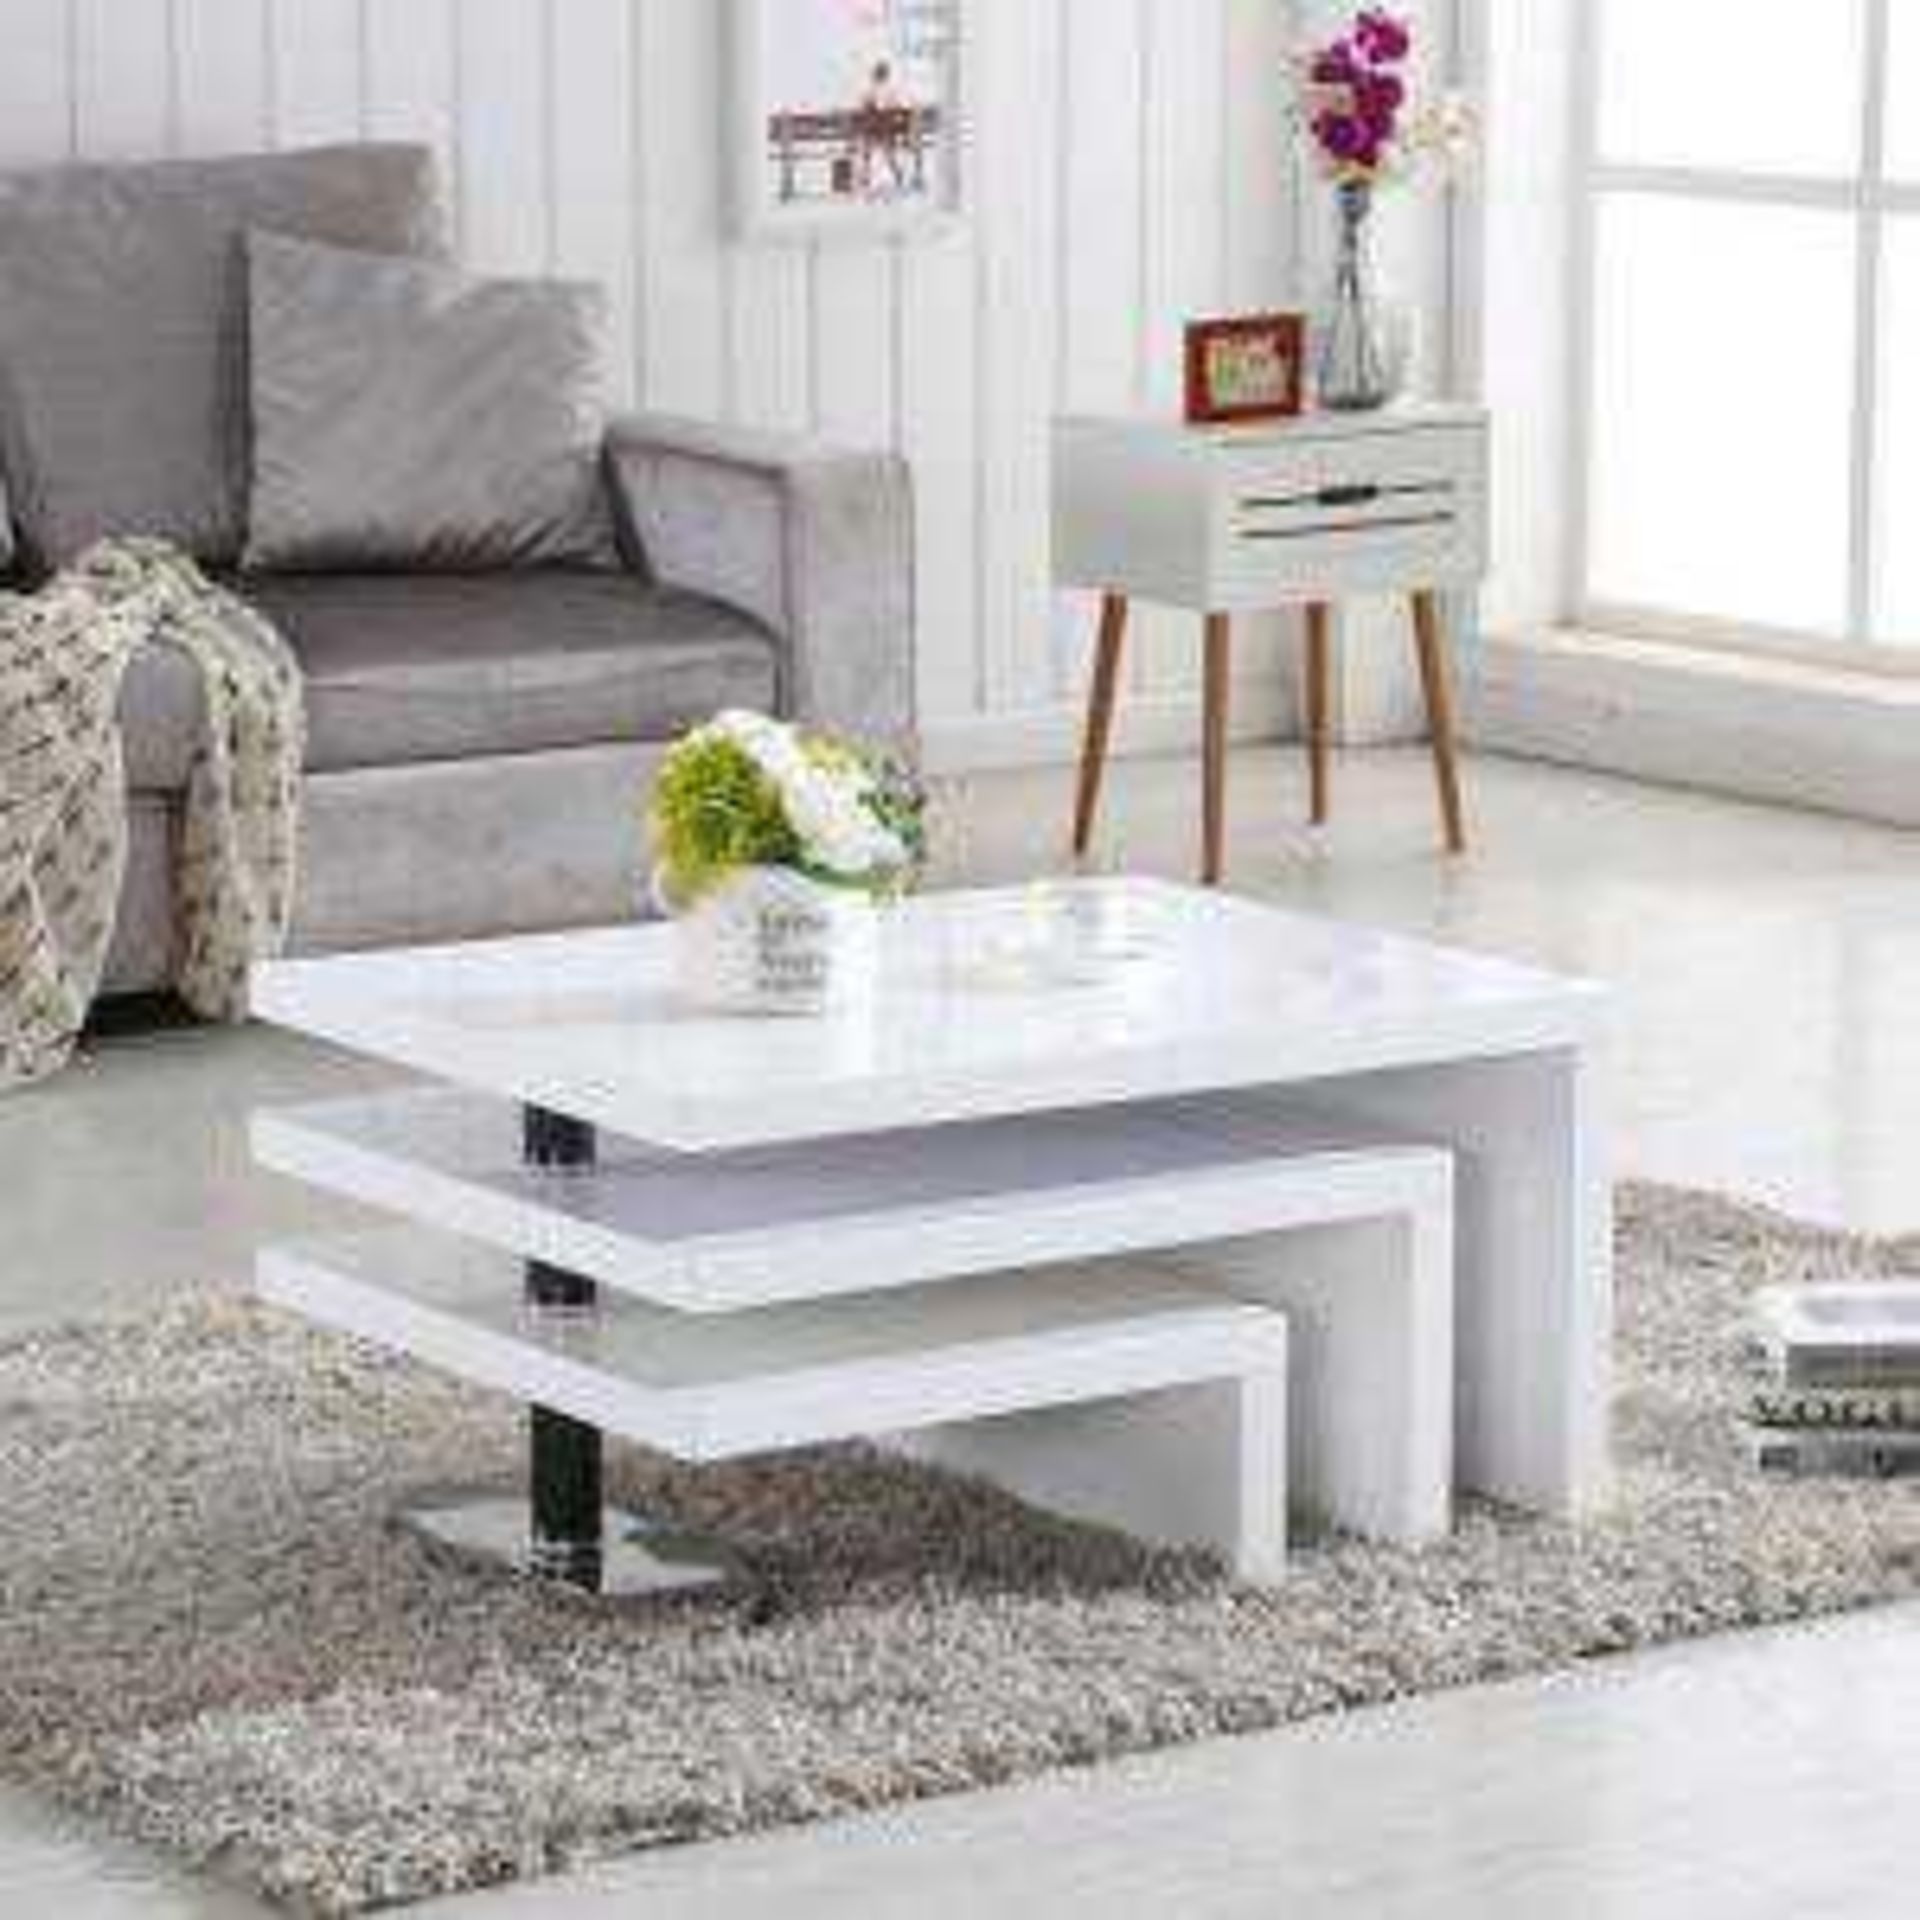 Rrp £320 Coffee Table